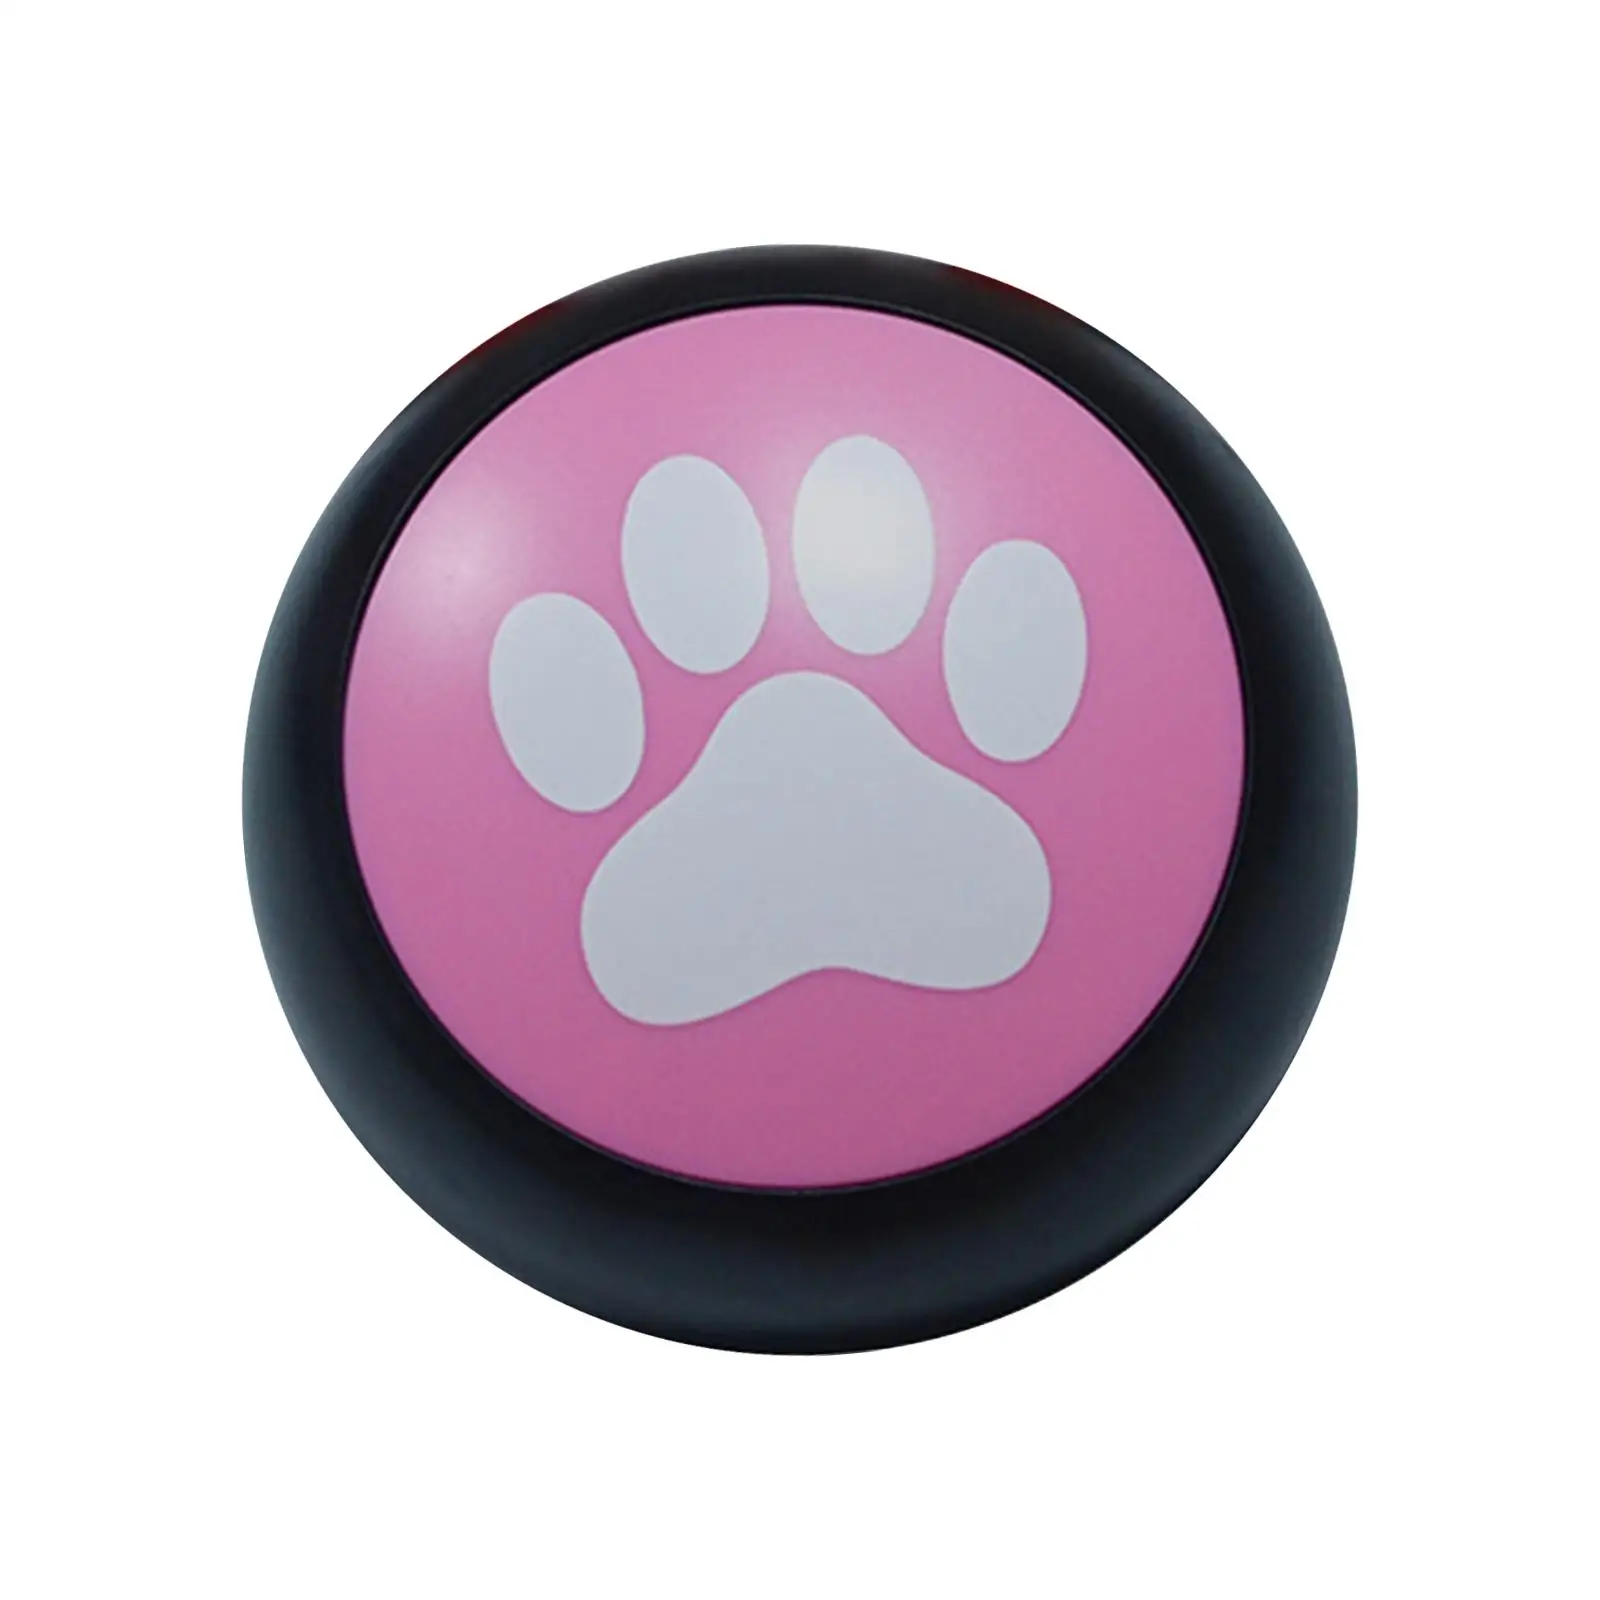 Recordable Sound Button Dog Interactive Toy Educational Toy Puppy Kitten Recording Sound Button for Kids Child Learning